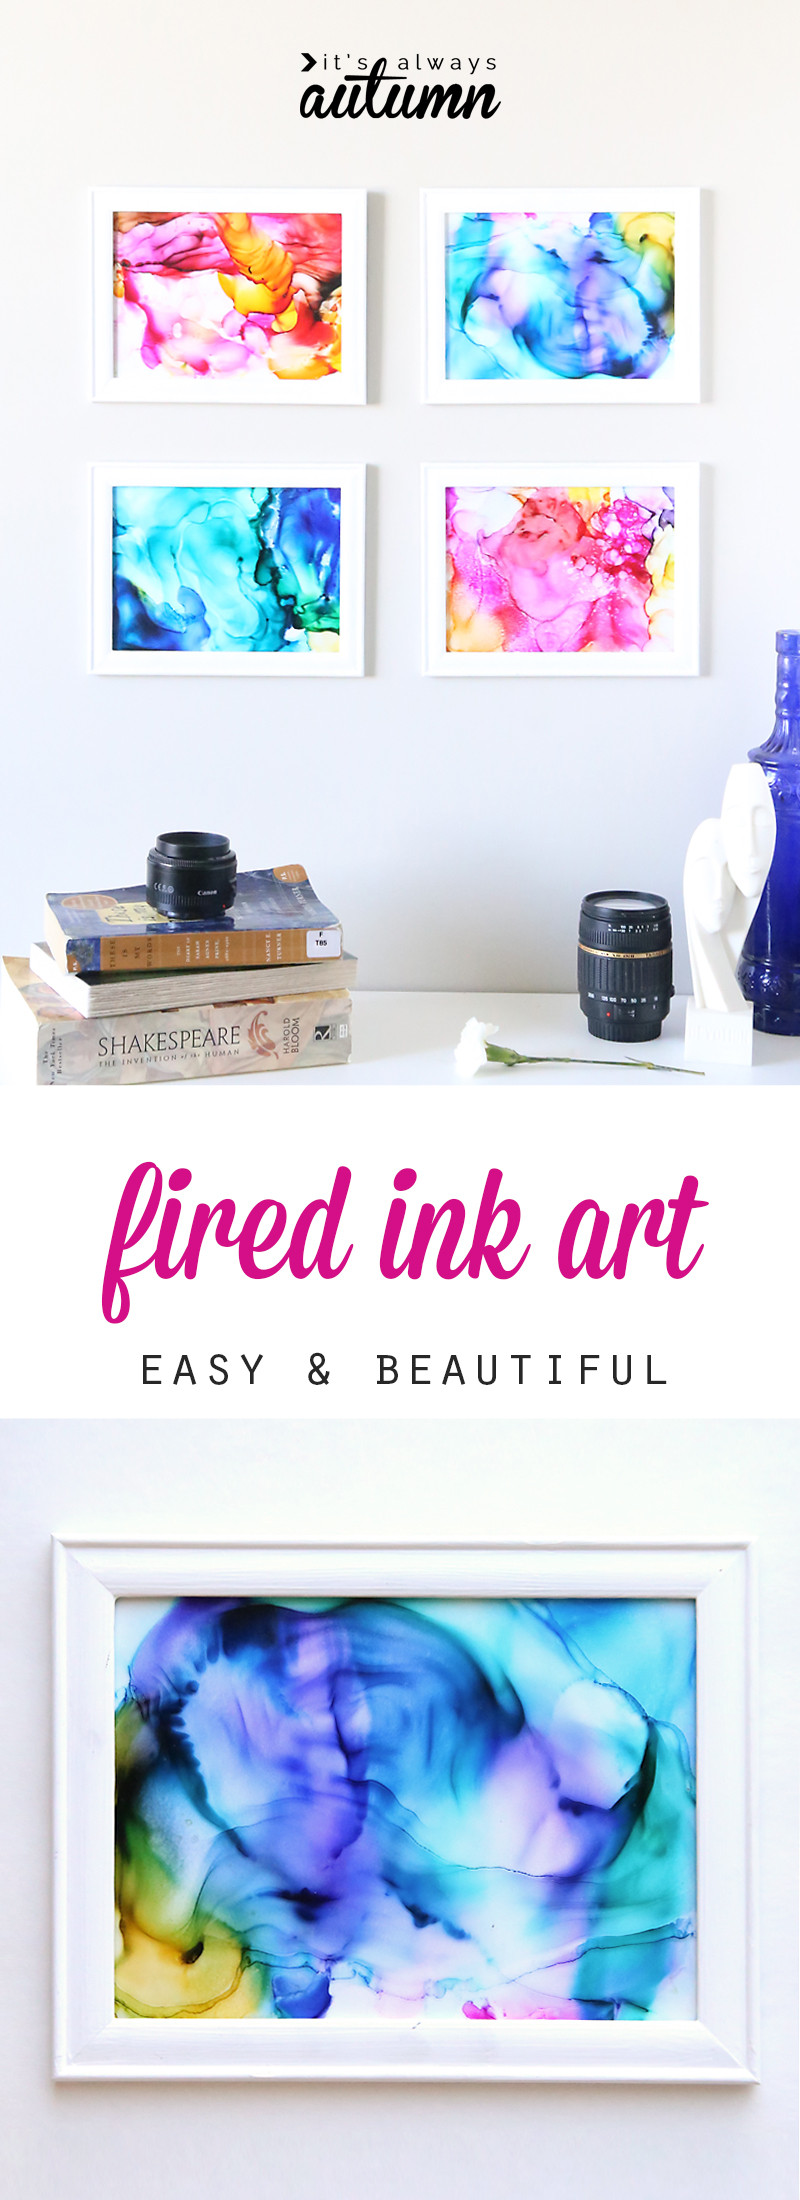 Art &amp; Craft Ideas For Adults
 fired ink art